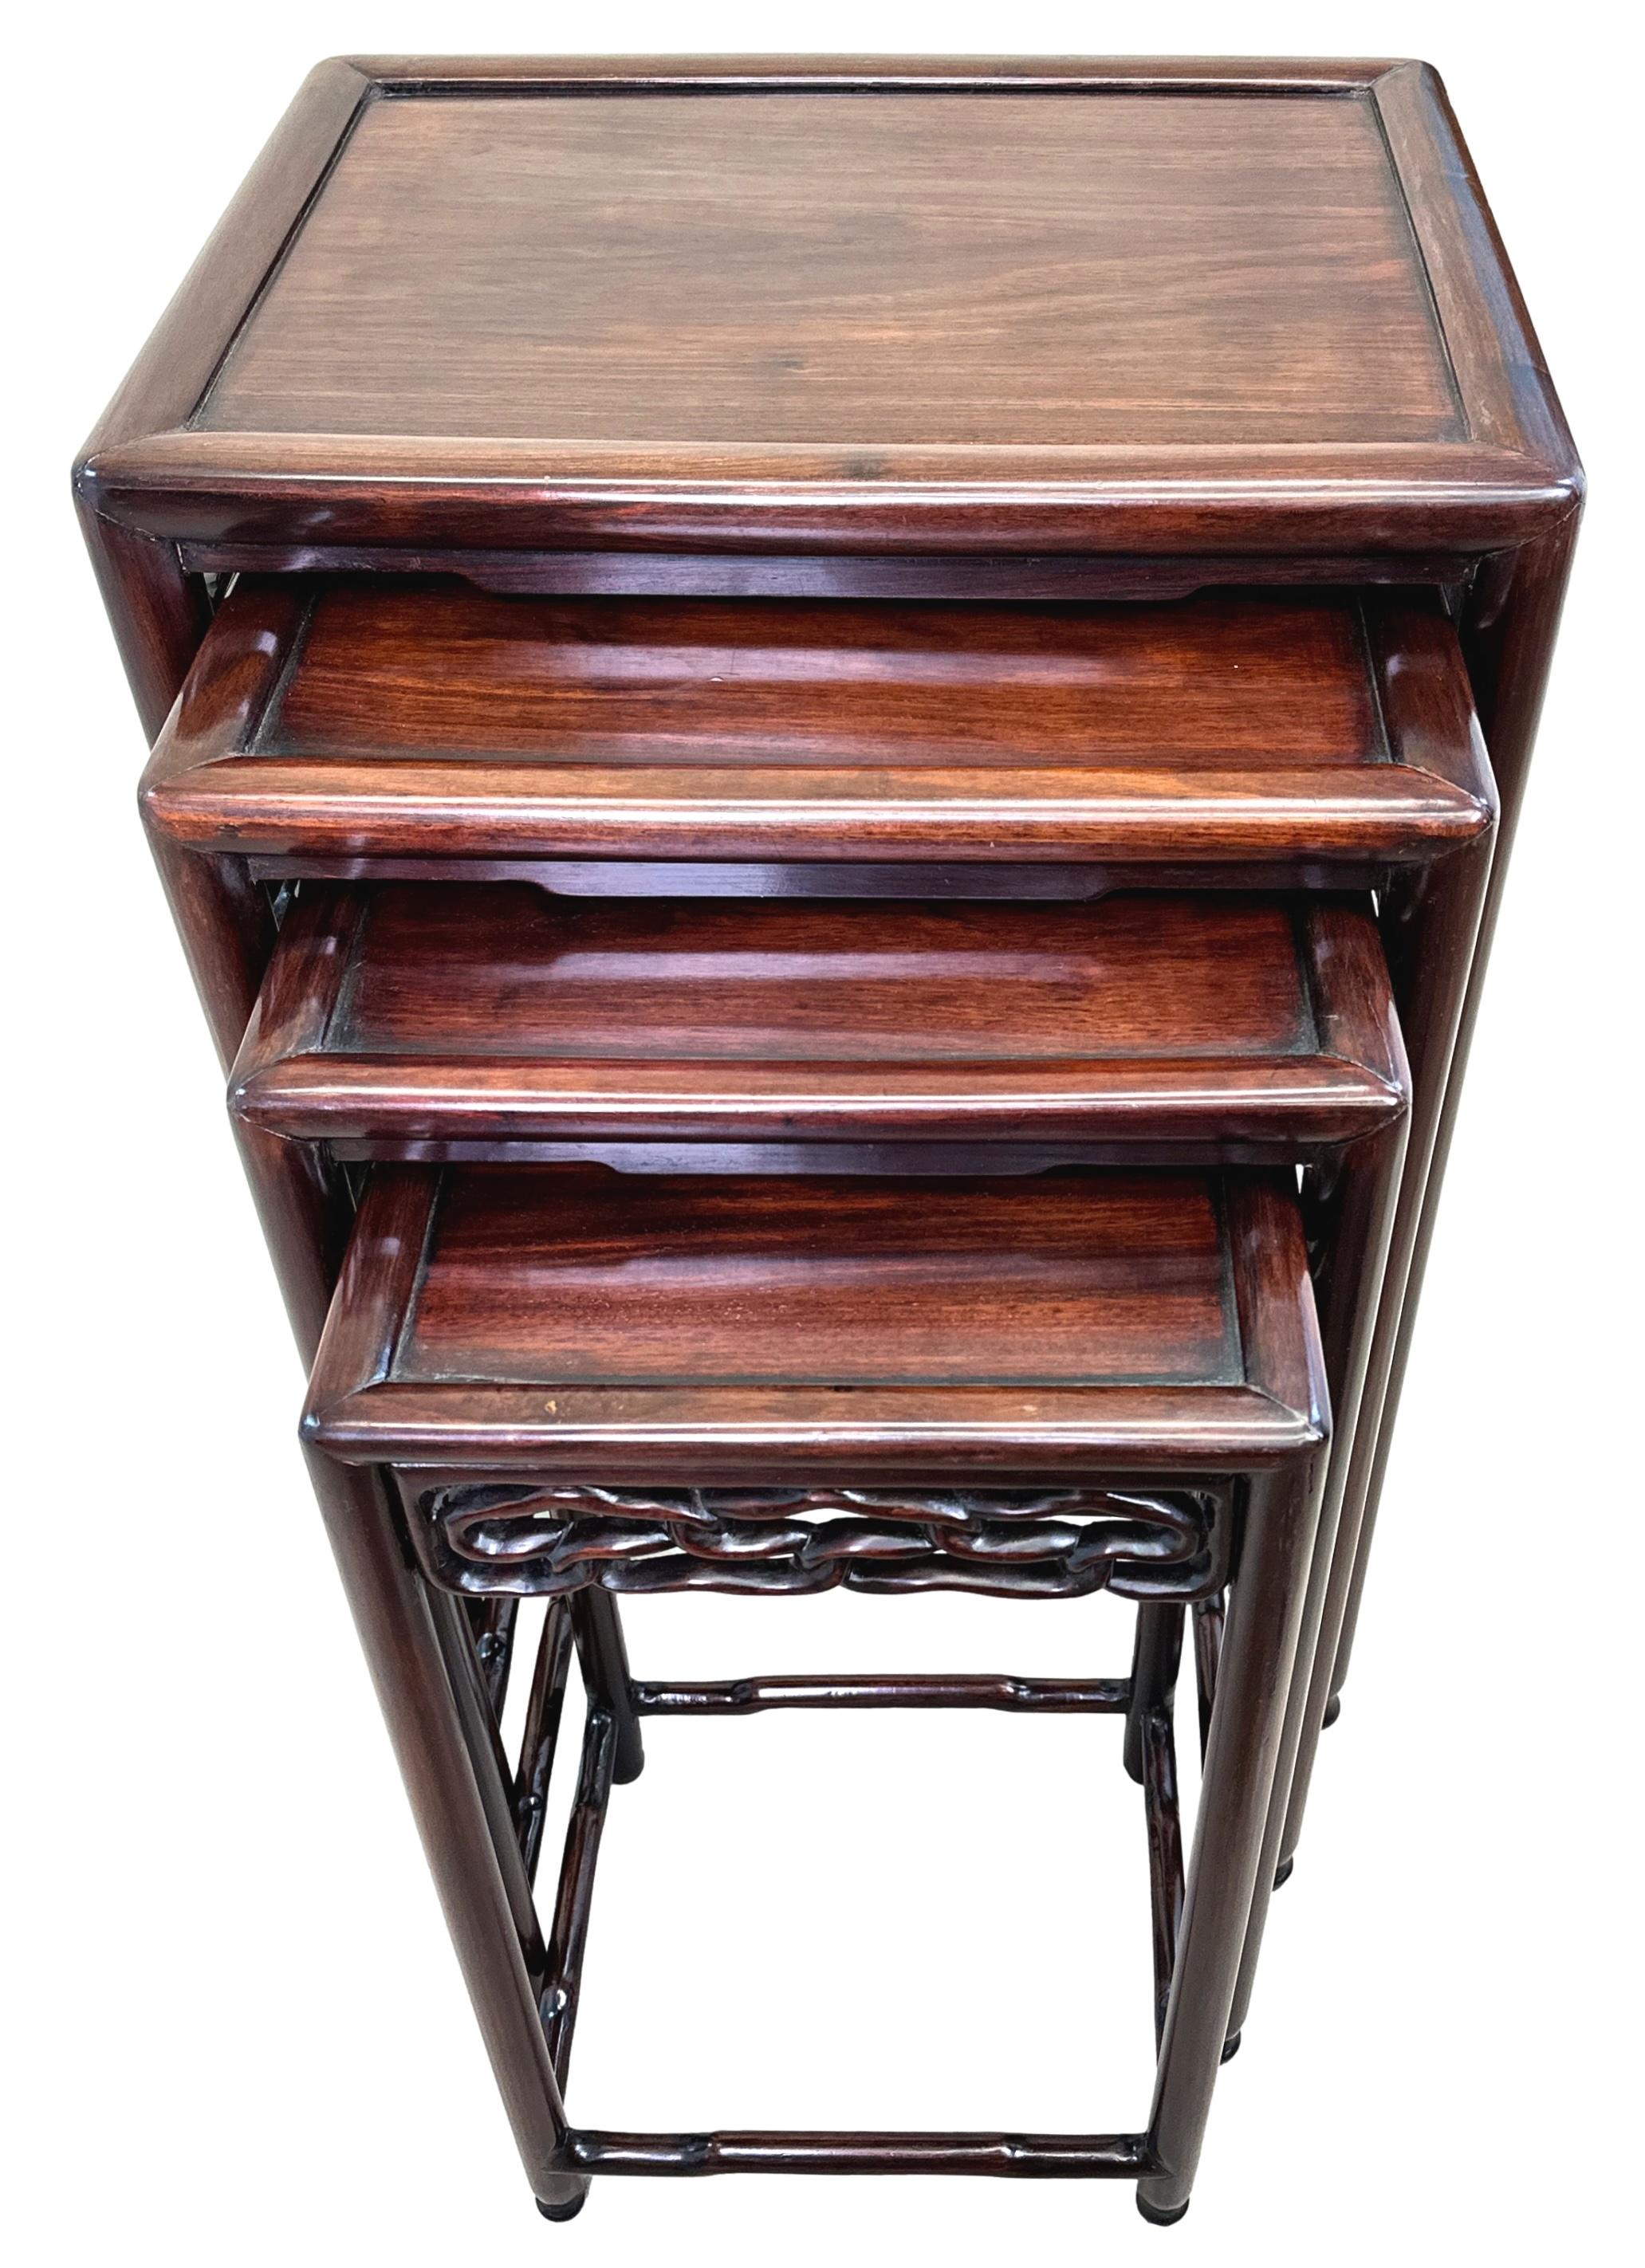 A Very Good Quality Mid 19th Century Nest of Four Oriental Hardwood Coffee Tables, Having Well Figured Panelled Tops, Retaining Good Rich Colour Throughout, Over Attractive Carved And Pierced Friezes, Raised On Elegant Turned Upright Supports.

Many